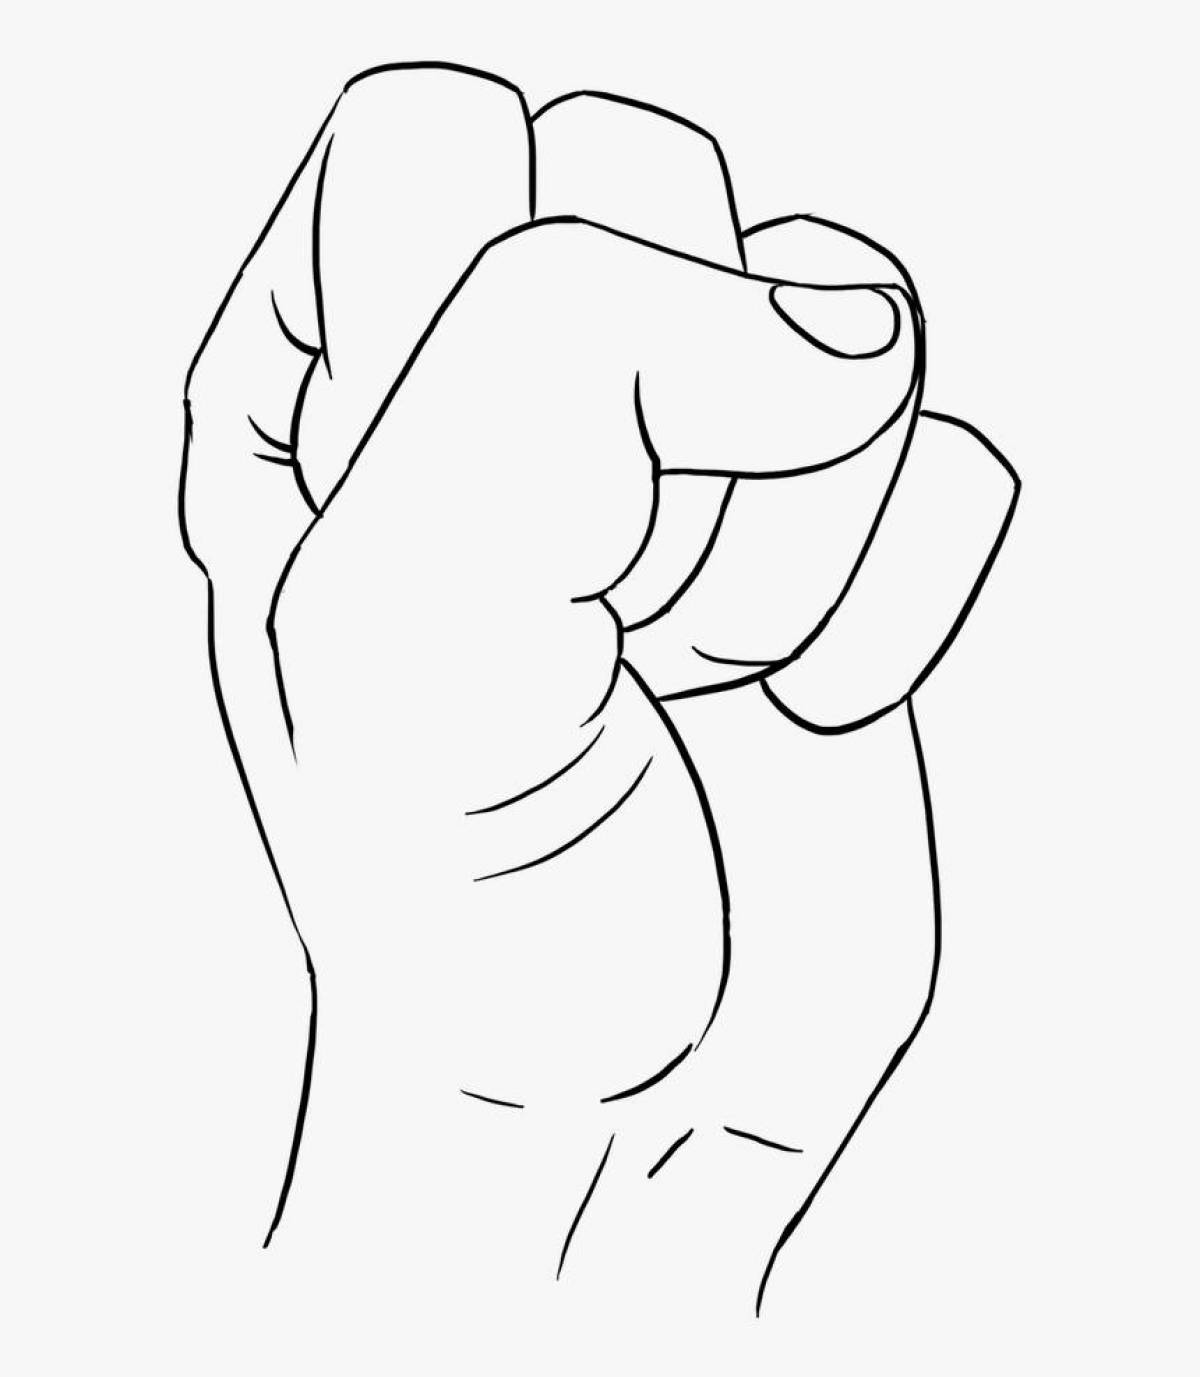 Luxury fist coloring page